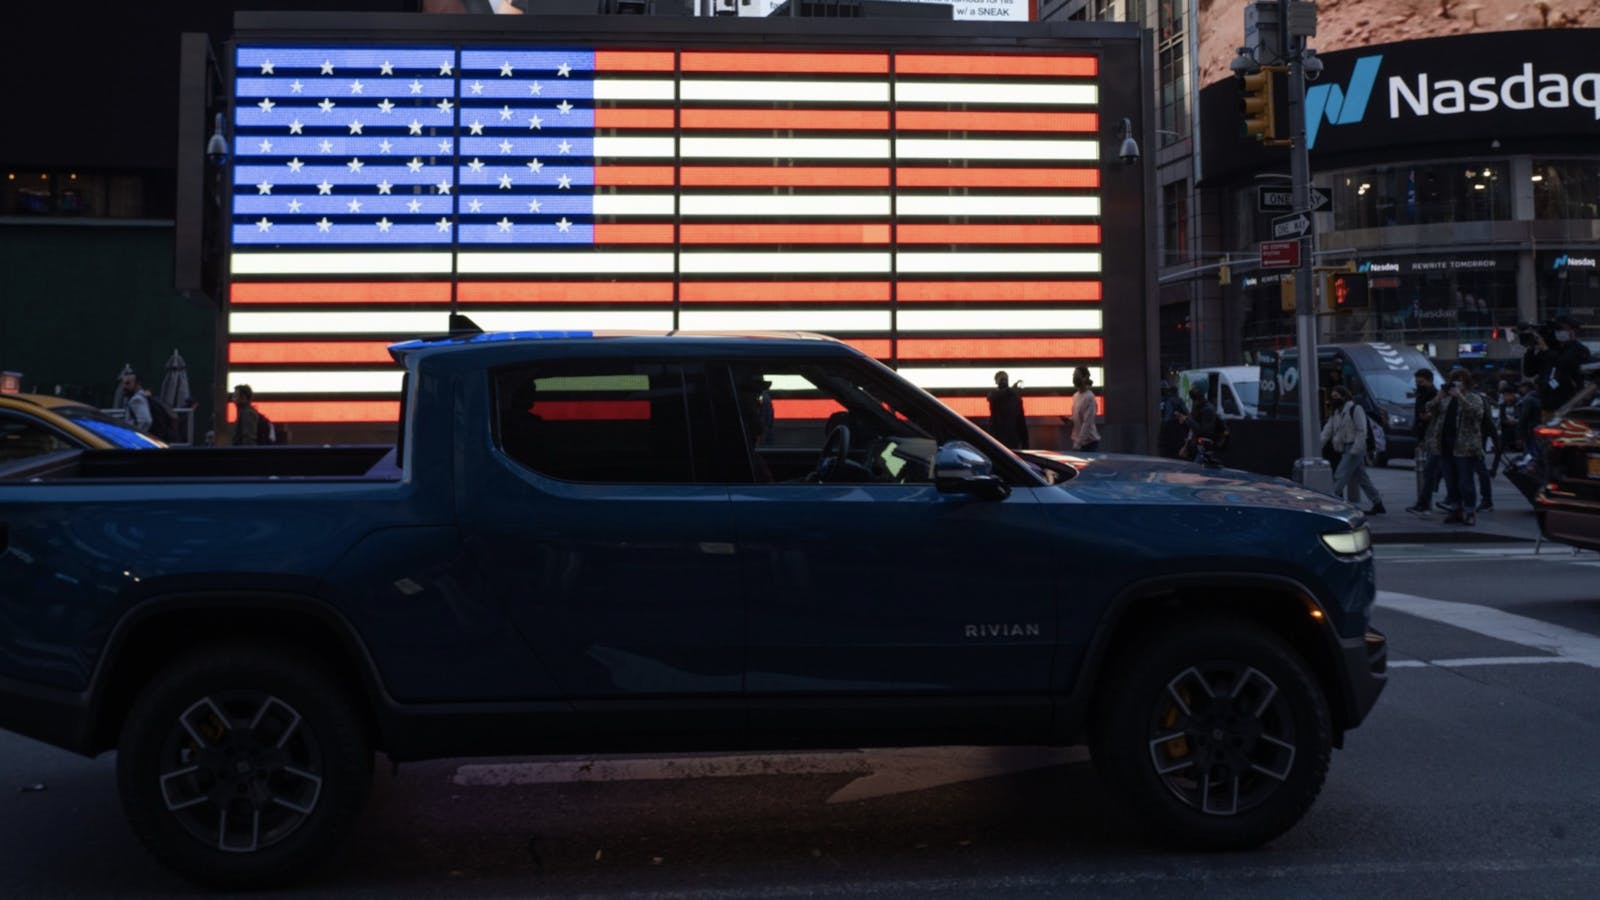 A Rivian truck driving past the Nasdaq in New York the day of Rivian's IPO. Photo by Bloomberg.